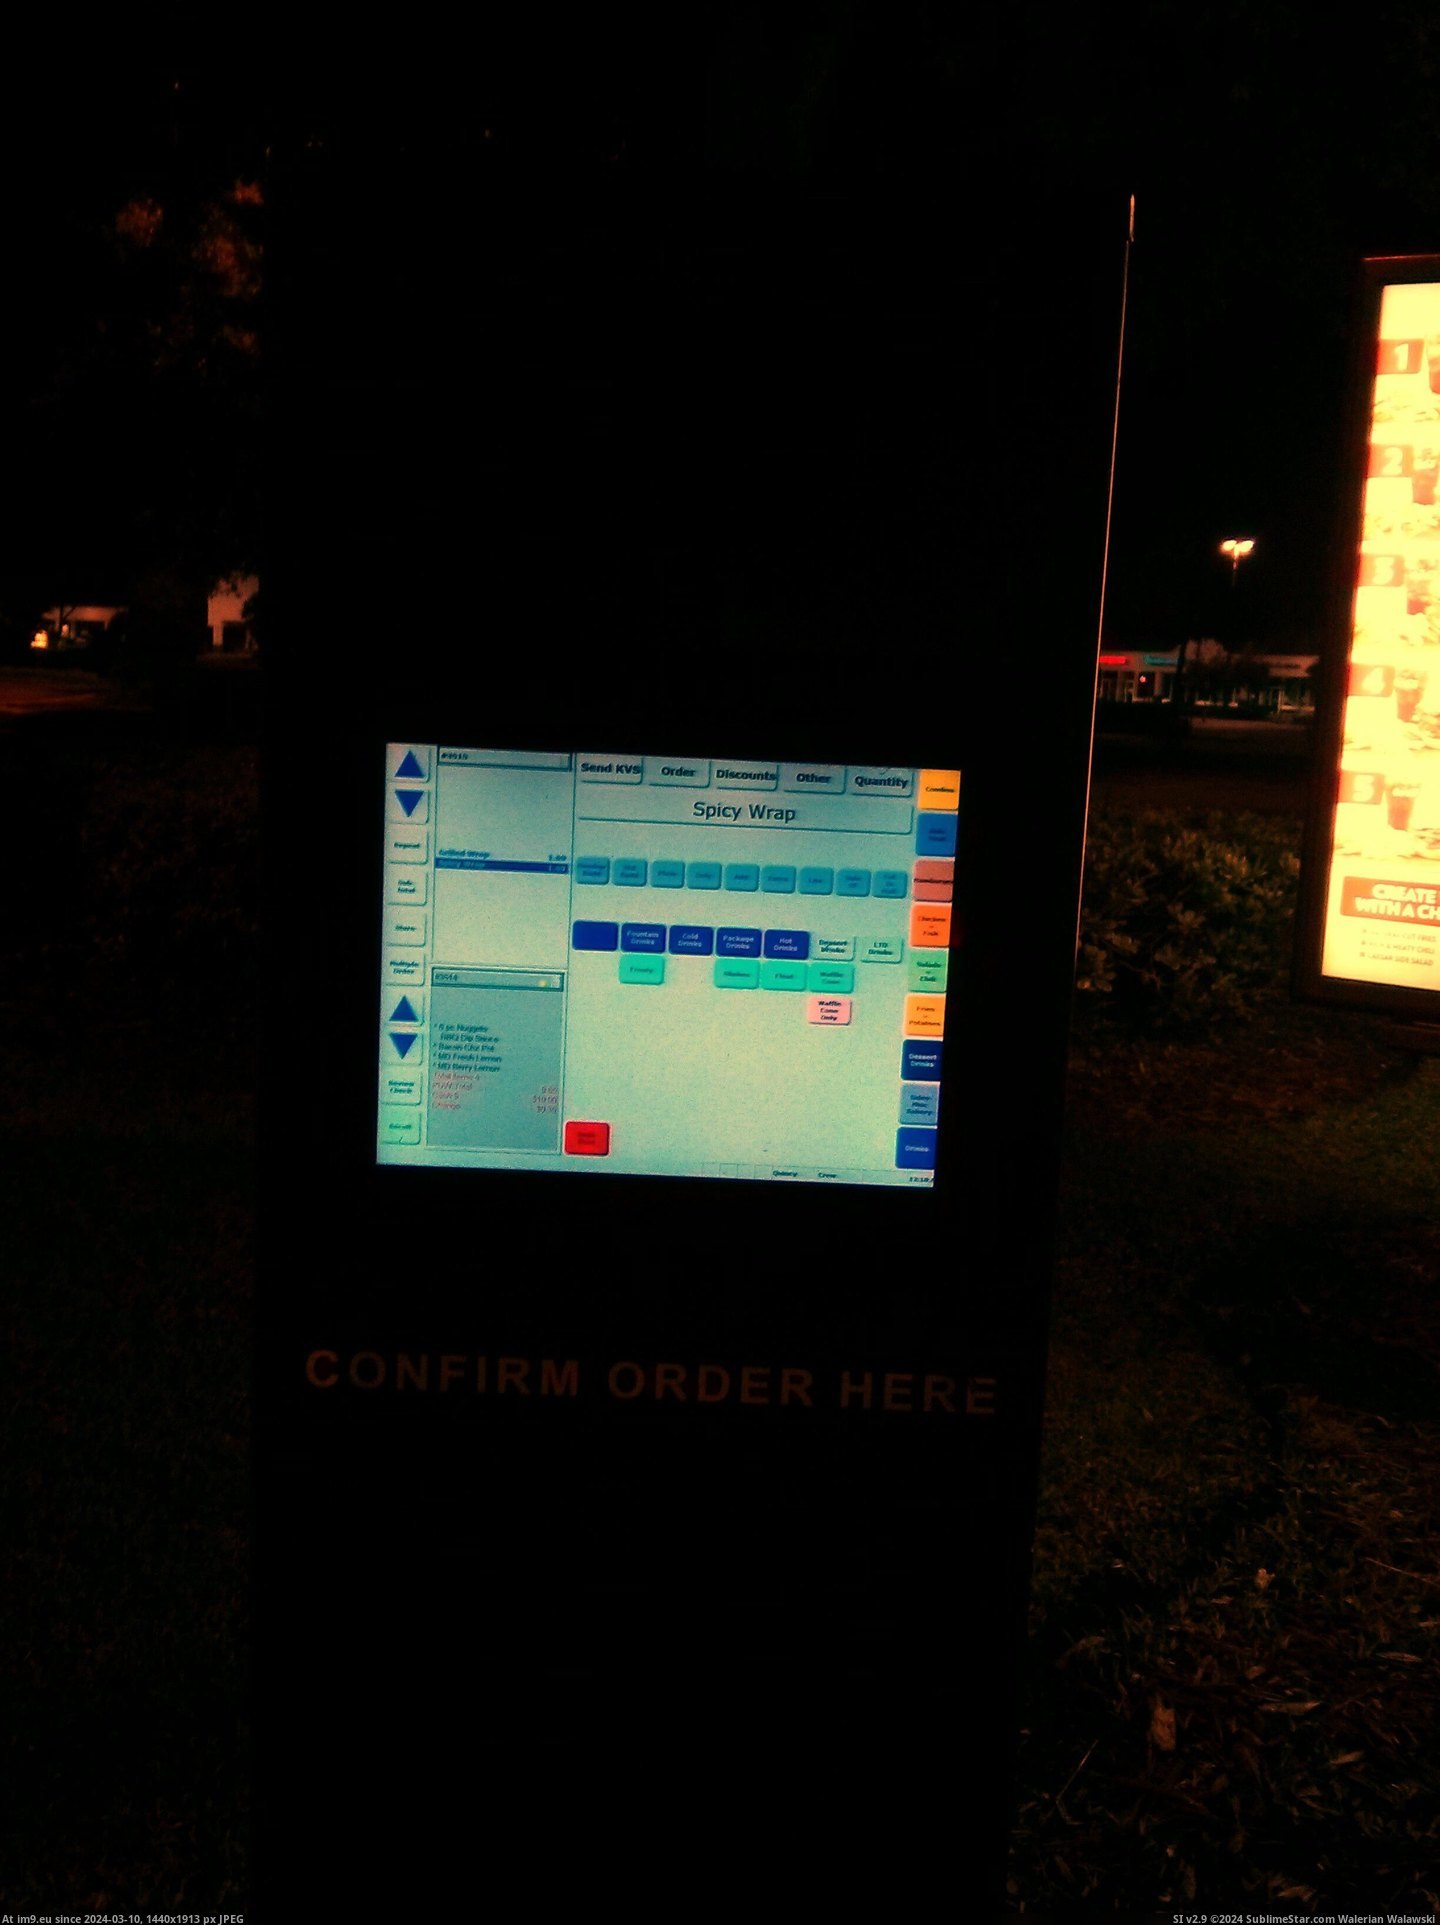 #Night #Screen #Order #Confirmation #Custome #Drive #Showed #Cashier [Mildlyinteresting] Last night, the order confirmation screen at the drive-thru showed the cashier's view instead of the custome Pic. (Obraz z album My r/MILDLYINTERESTING favs))